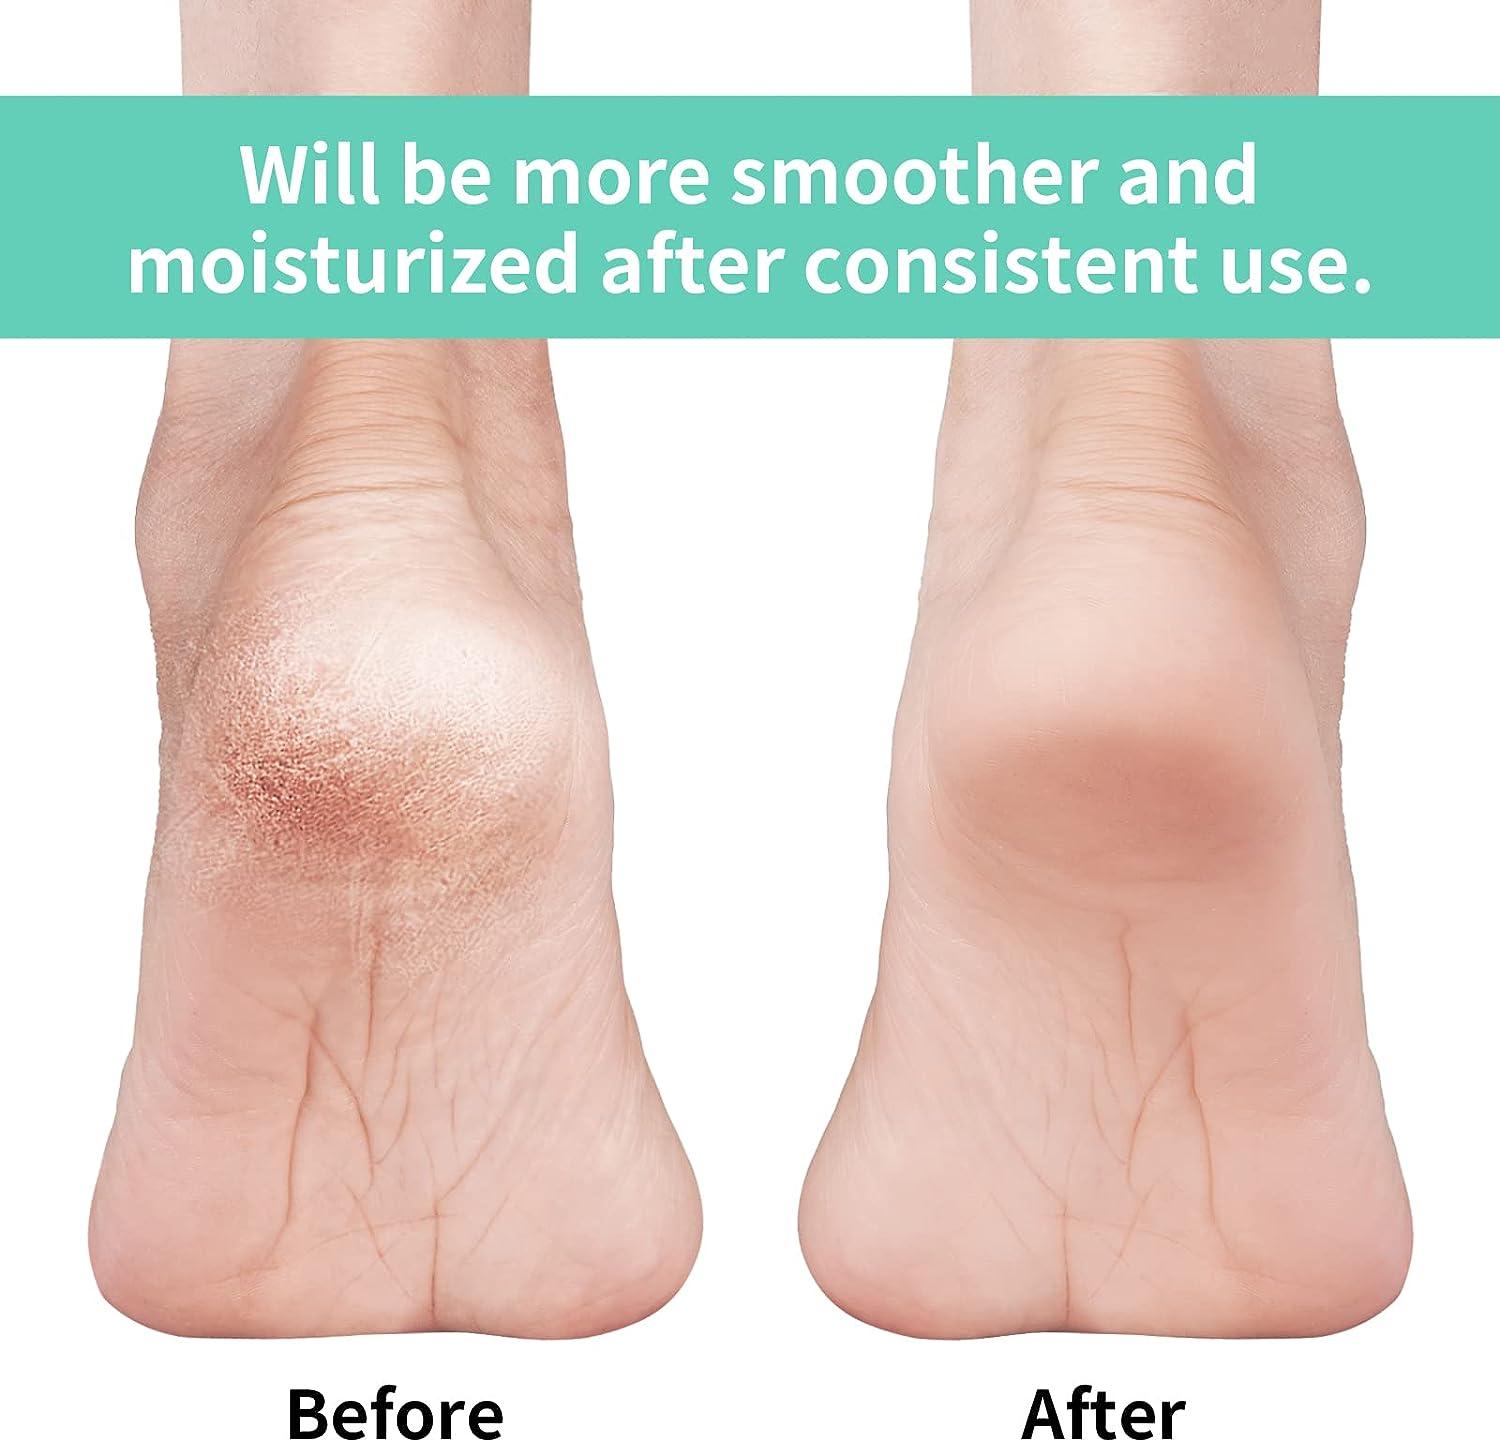 How to Fix Rough, Dry Cracked Skin on Feet - Lativ Natural Skin Revival